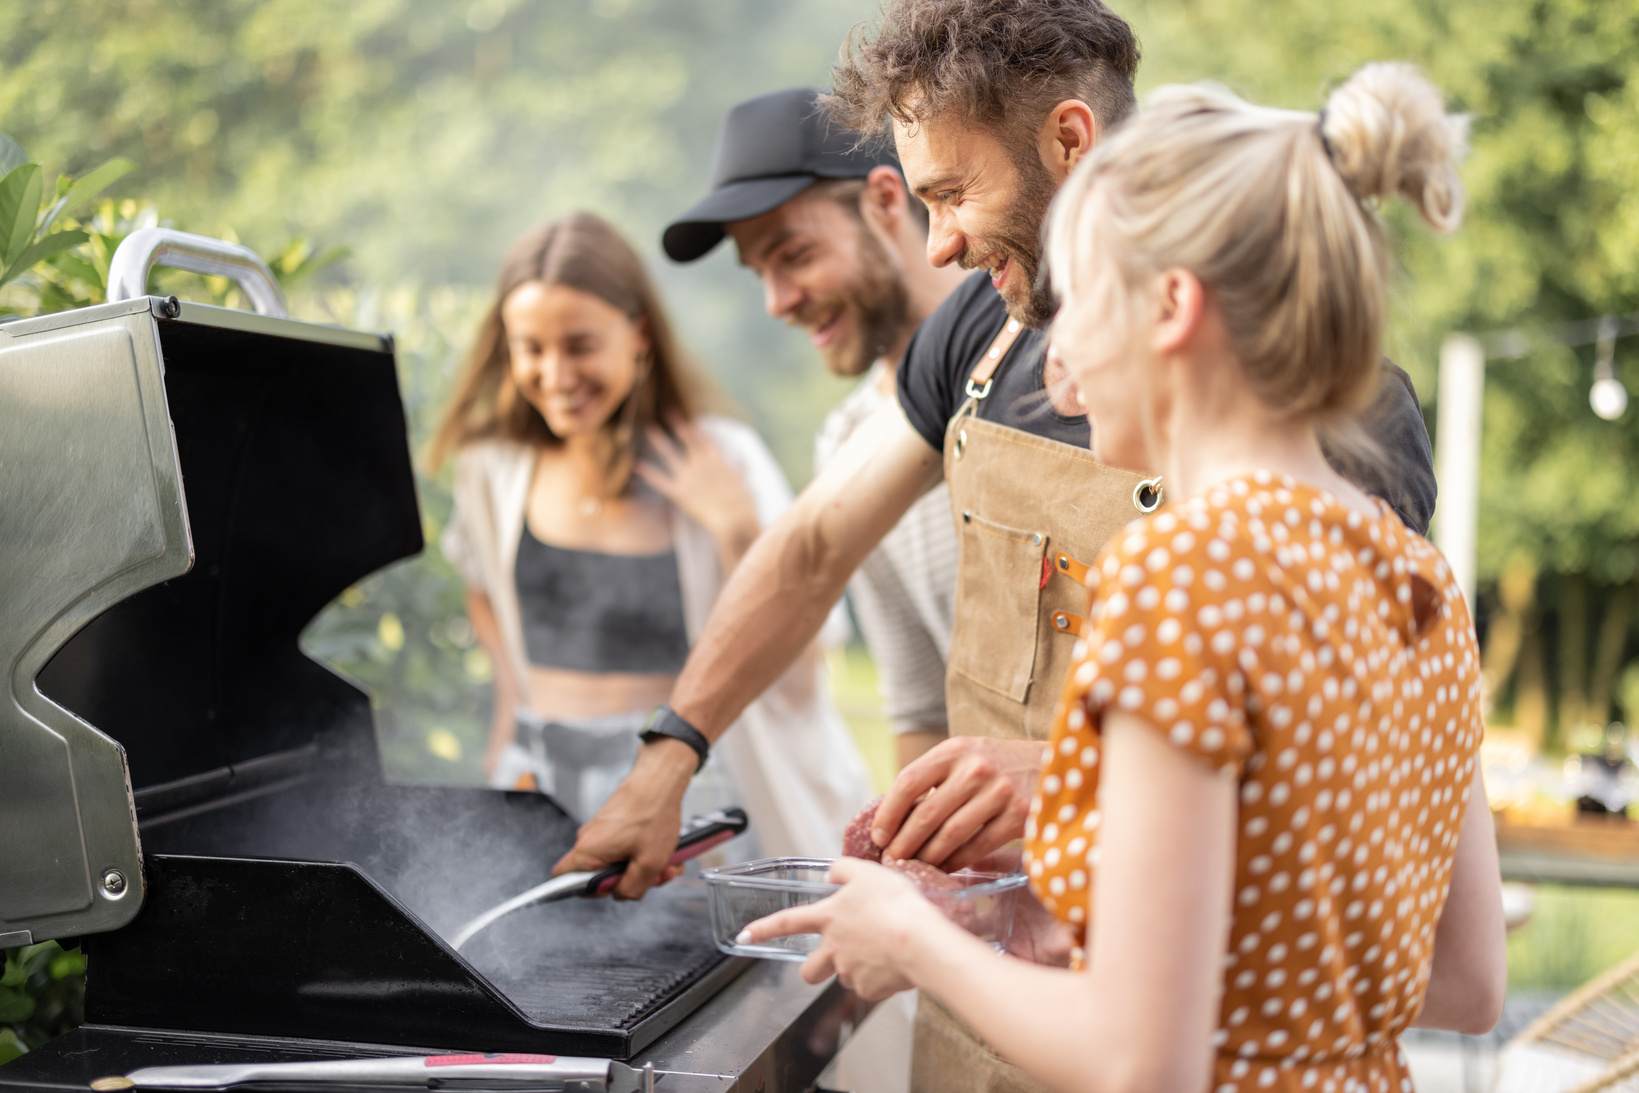 Friends Cooking on a Grill Outdoors